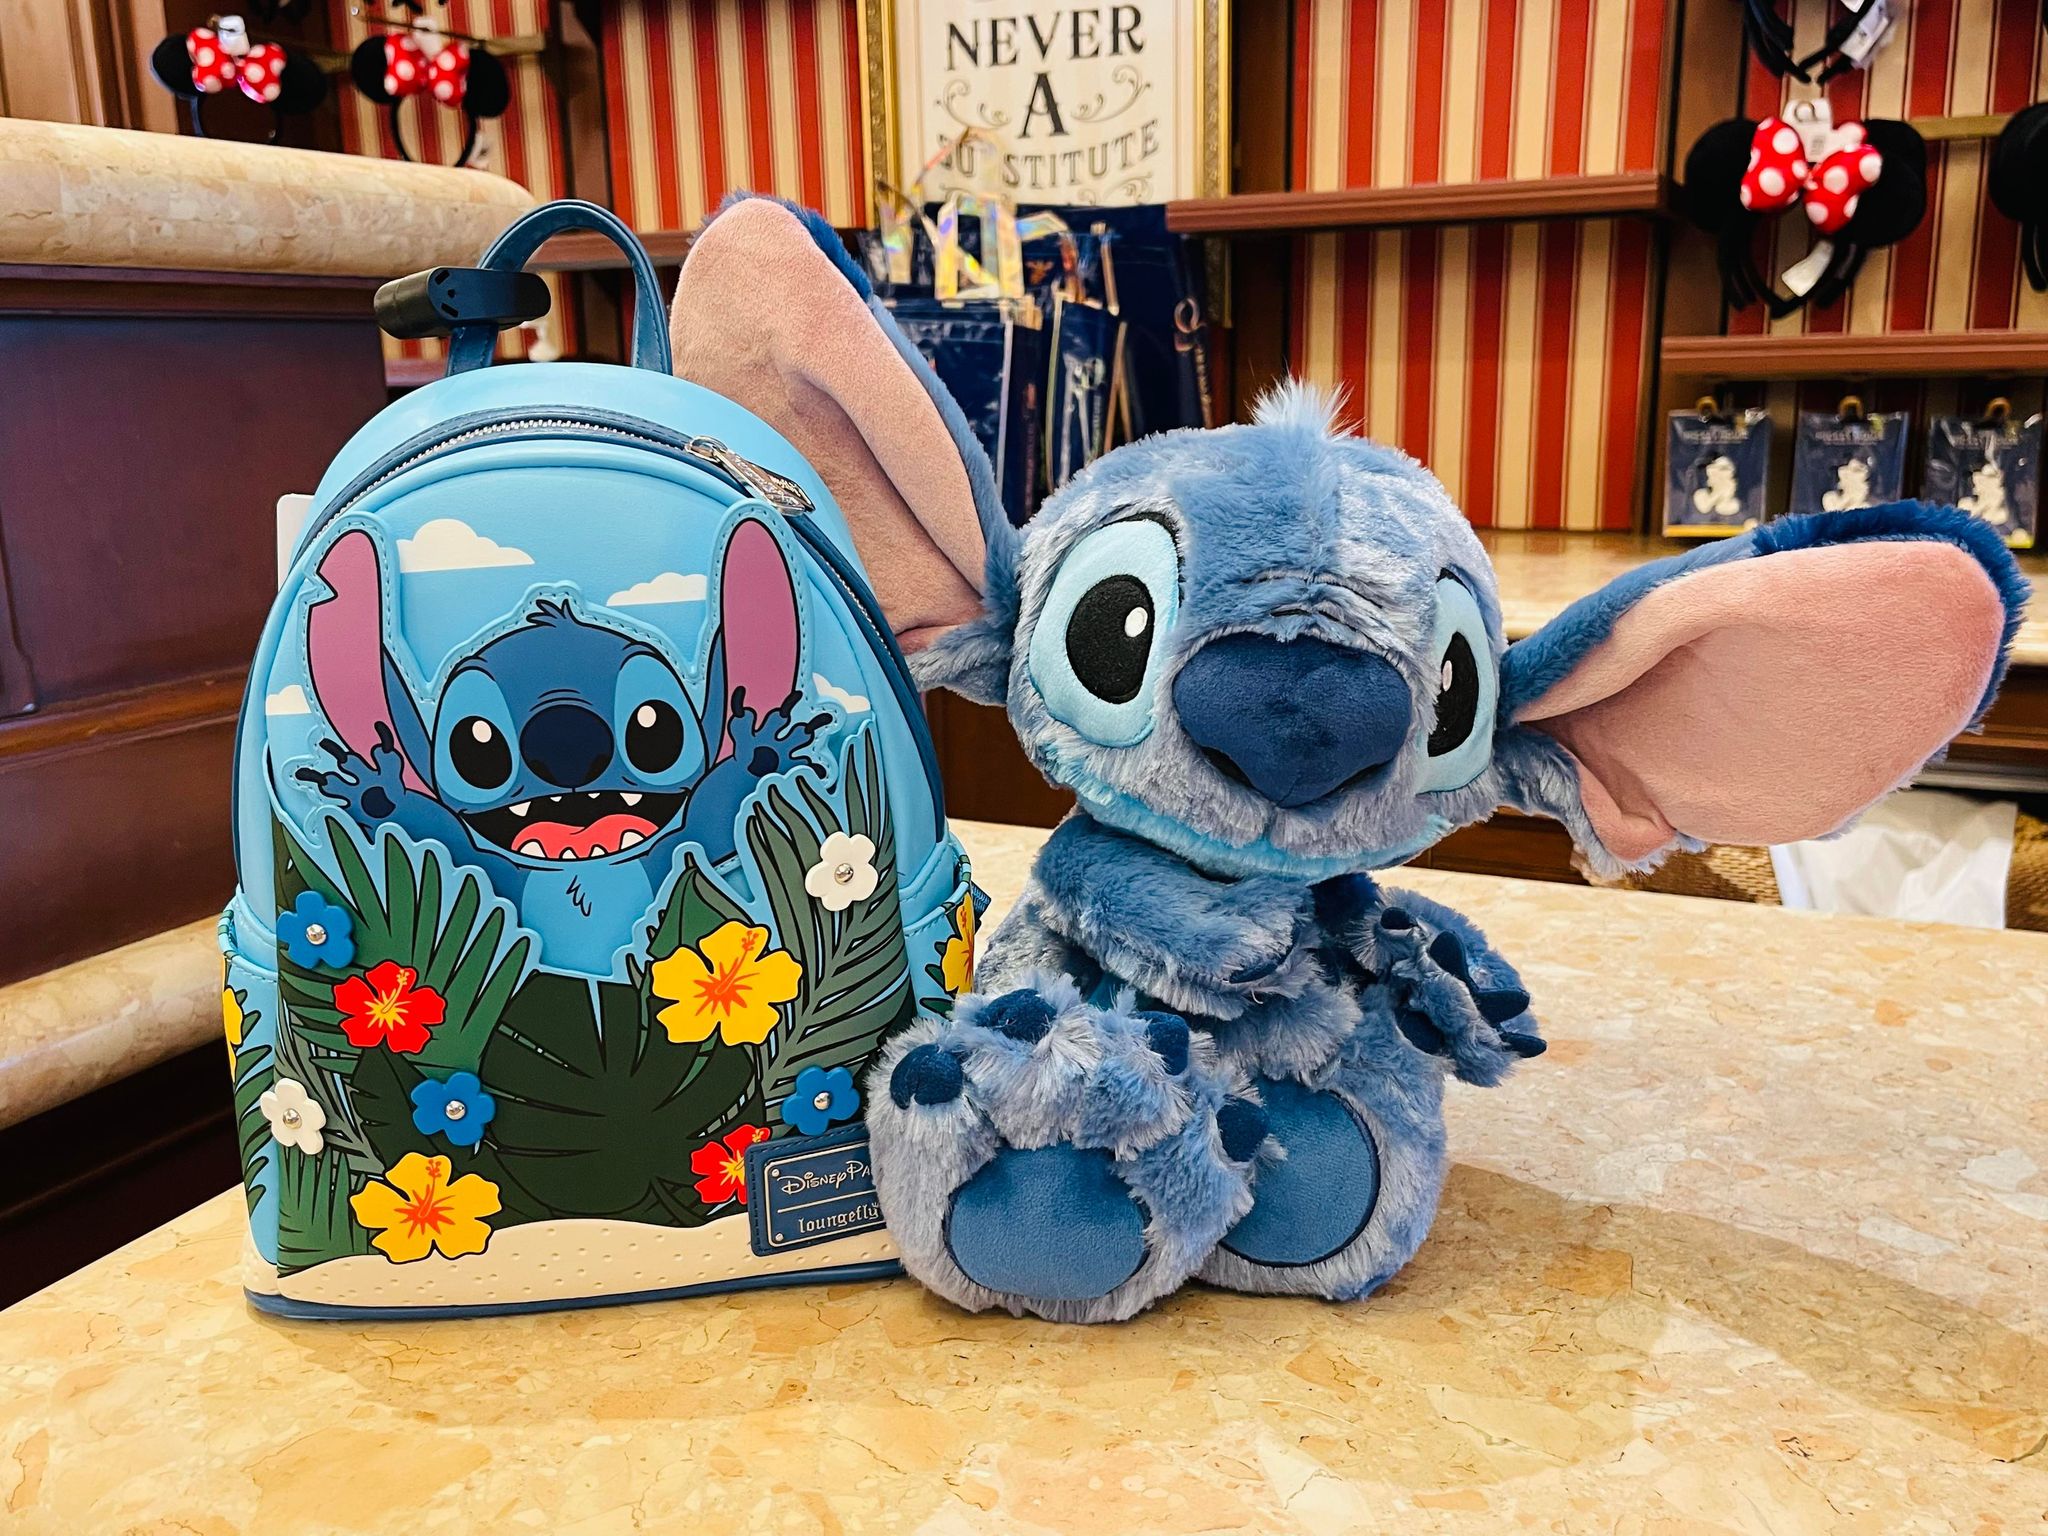 New Stitch Hide-And-Seek Loungefly Mini Backpack at Walt Disney World - WDW  News Today